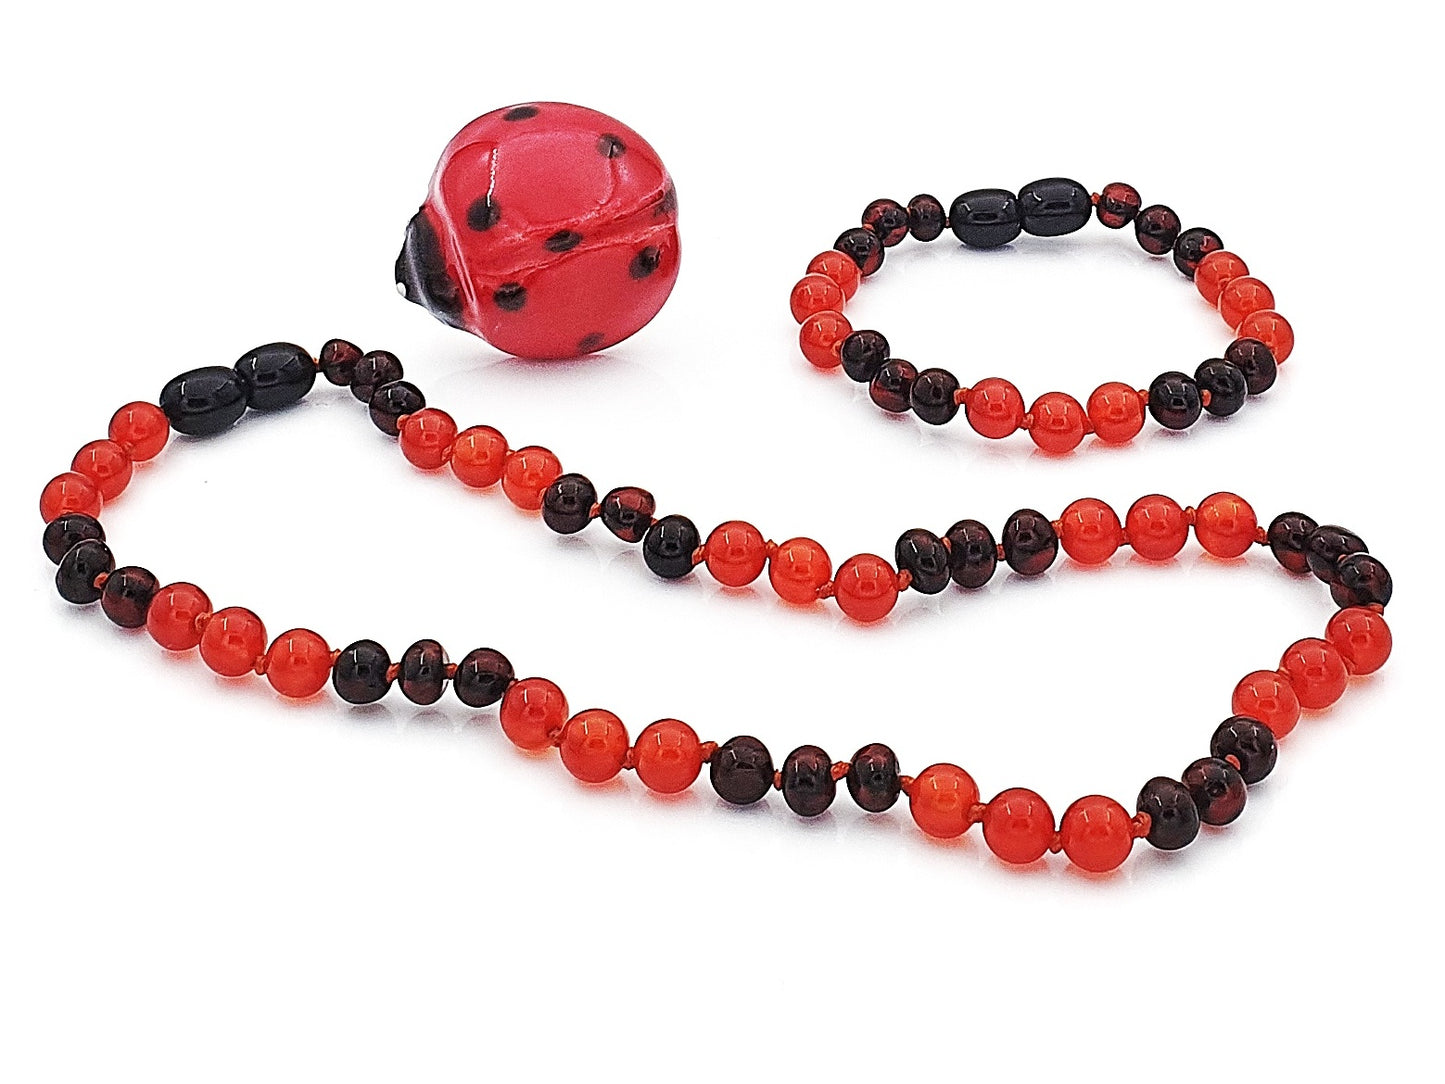 Red carnelian gemstones with Baltic amber jewelry